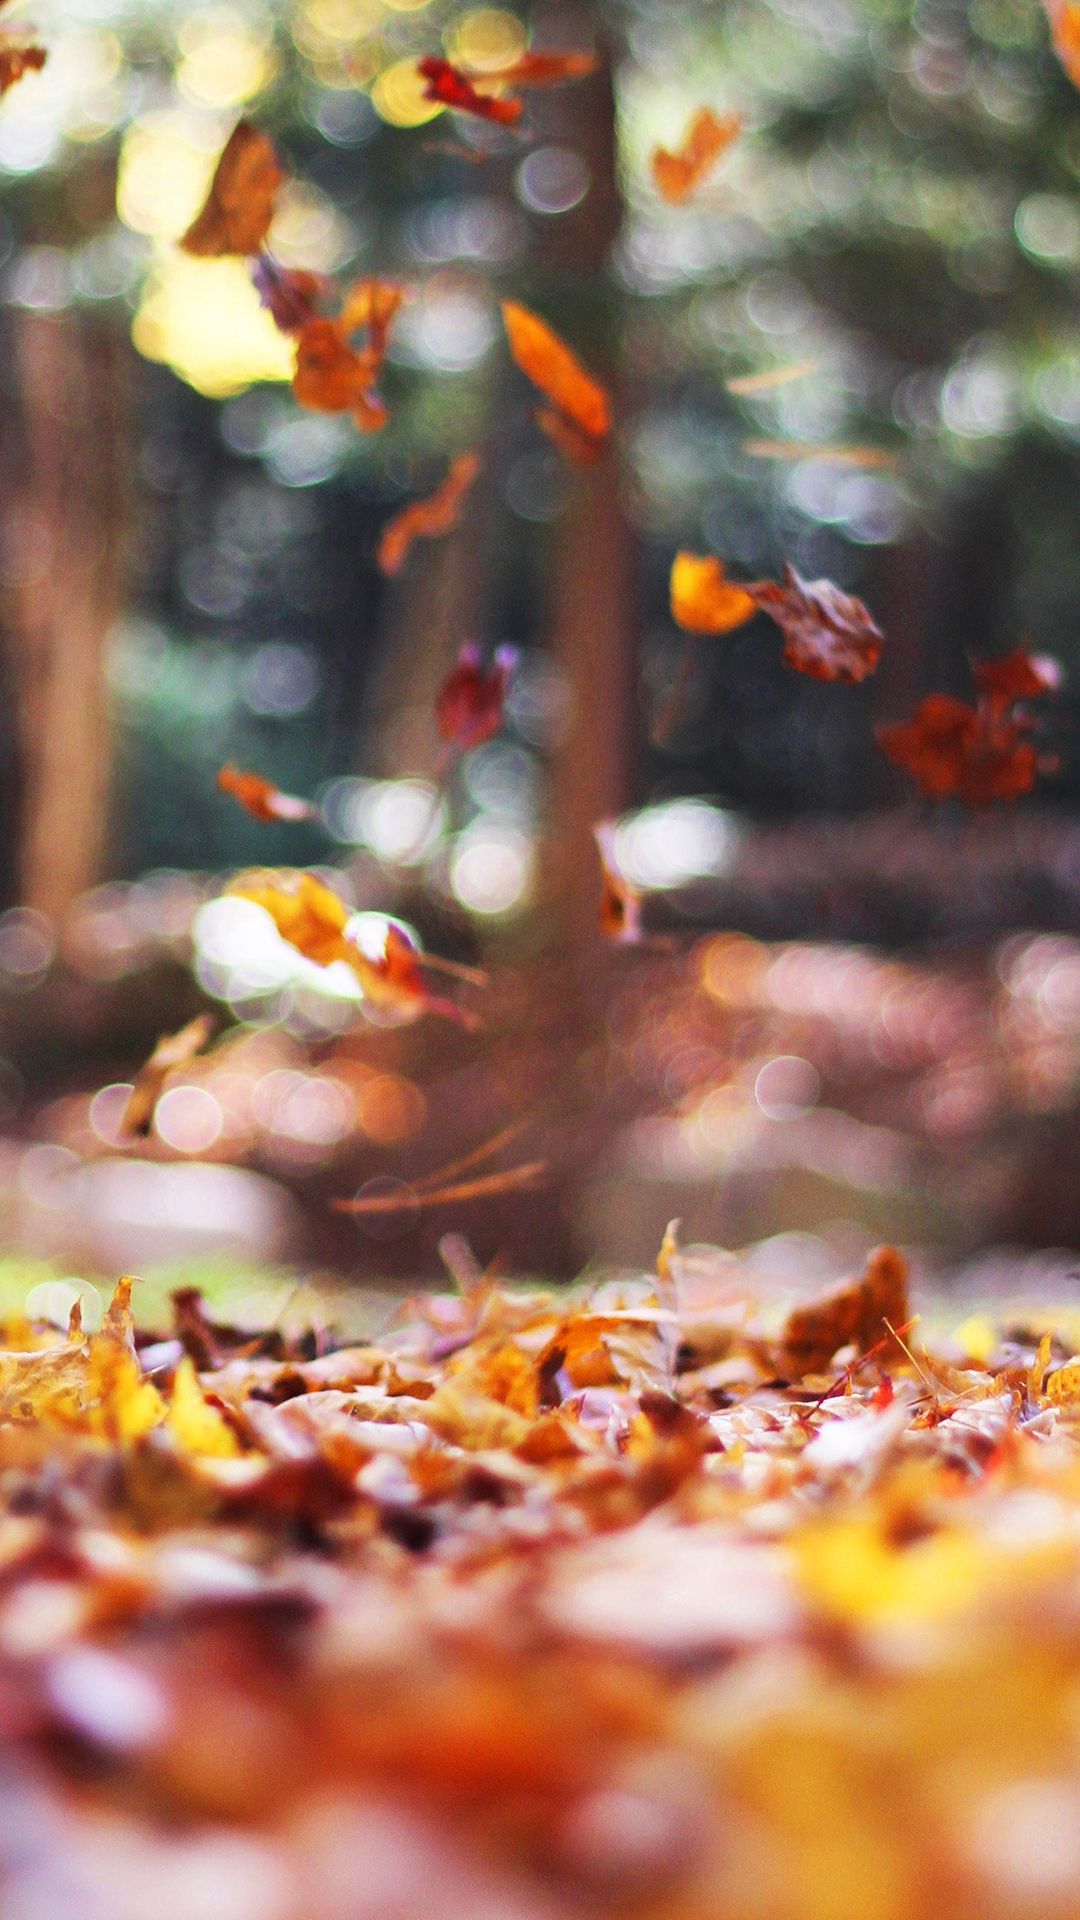 fall iphone background, fall iphone 5 wallpaper